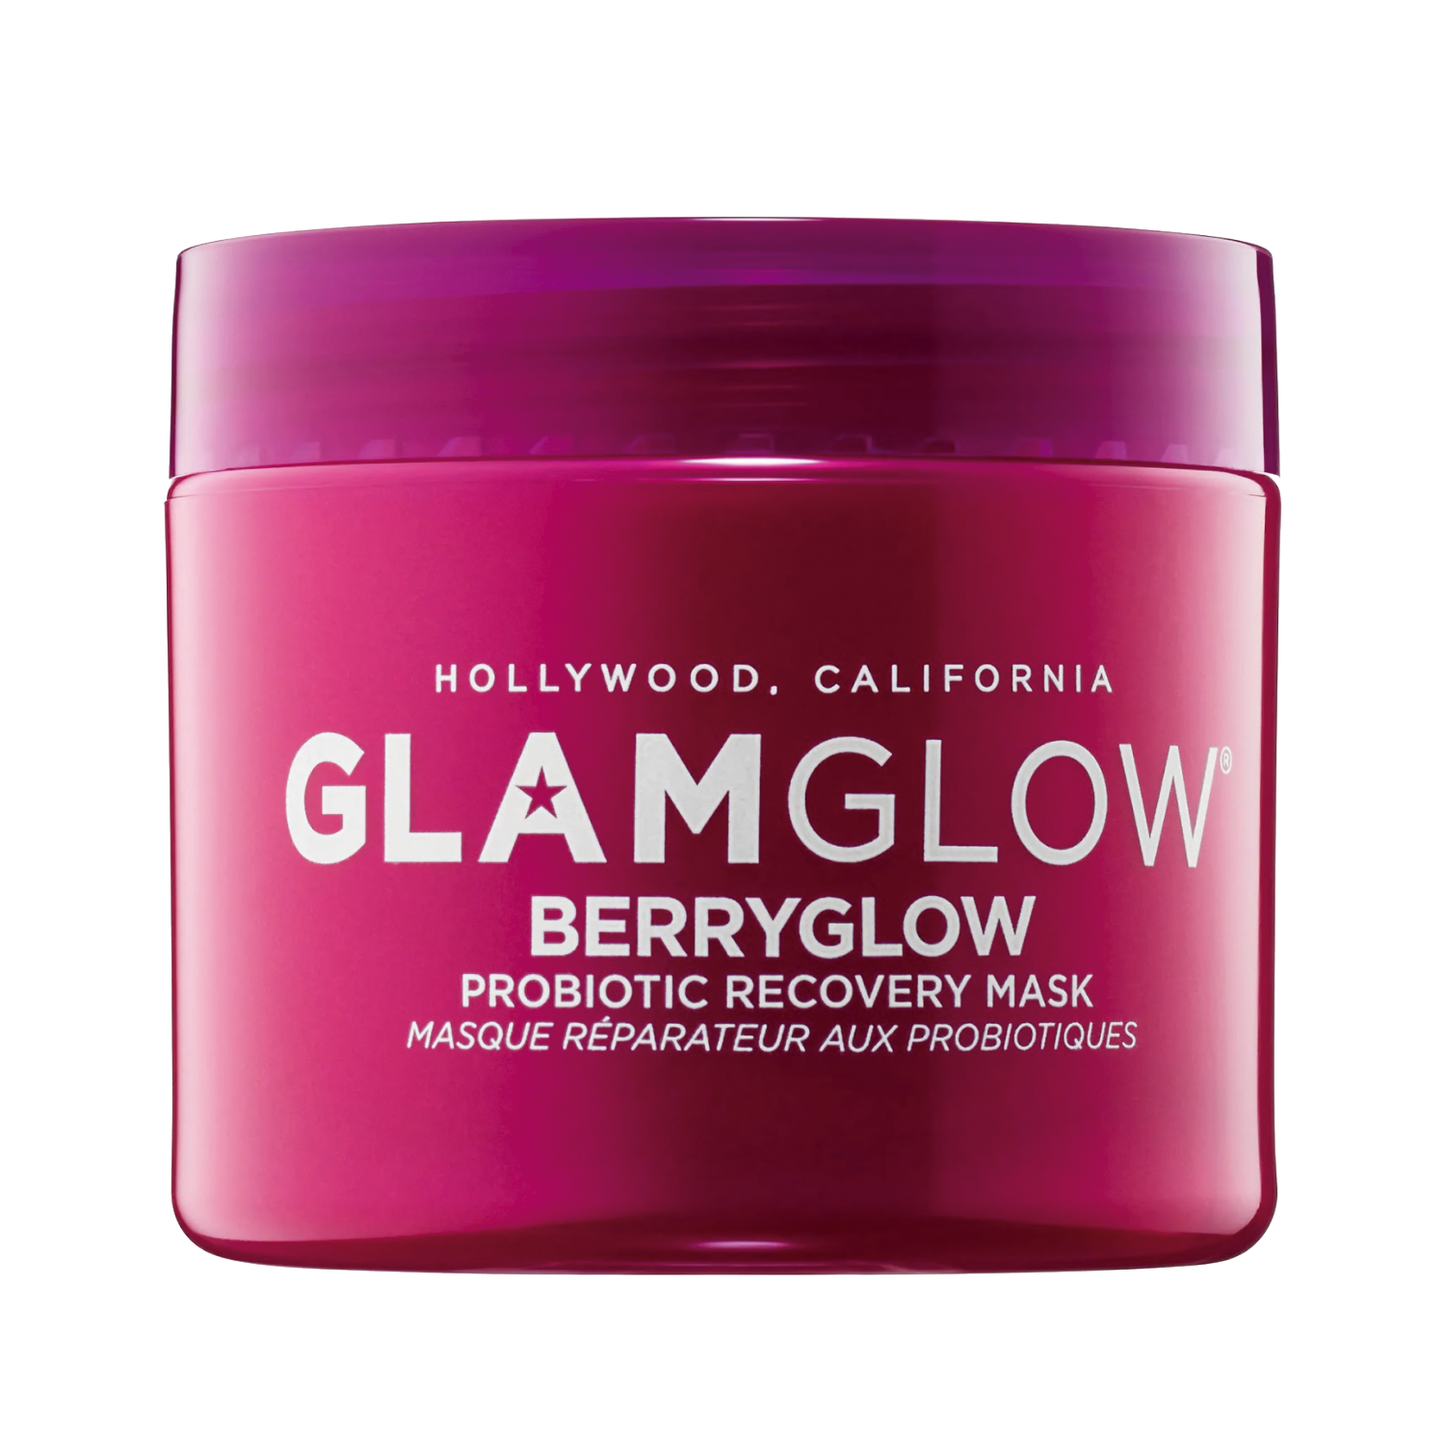 GLAMGLOW BERRYGLOW PROBIOTIC RECOVERY MASK-